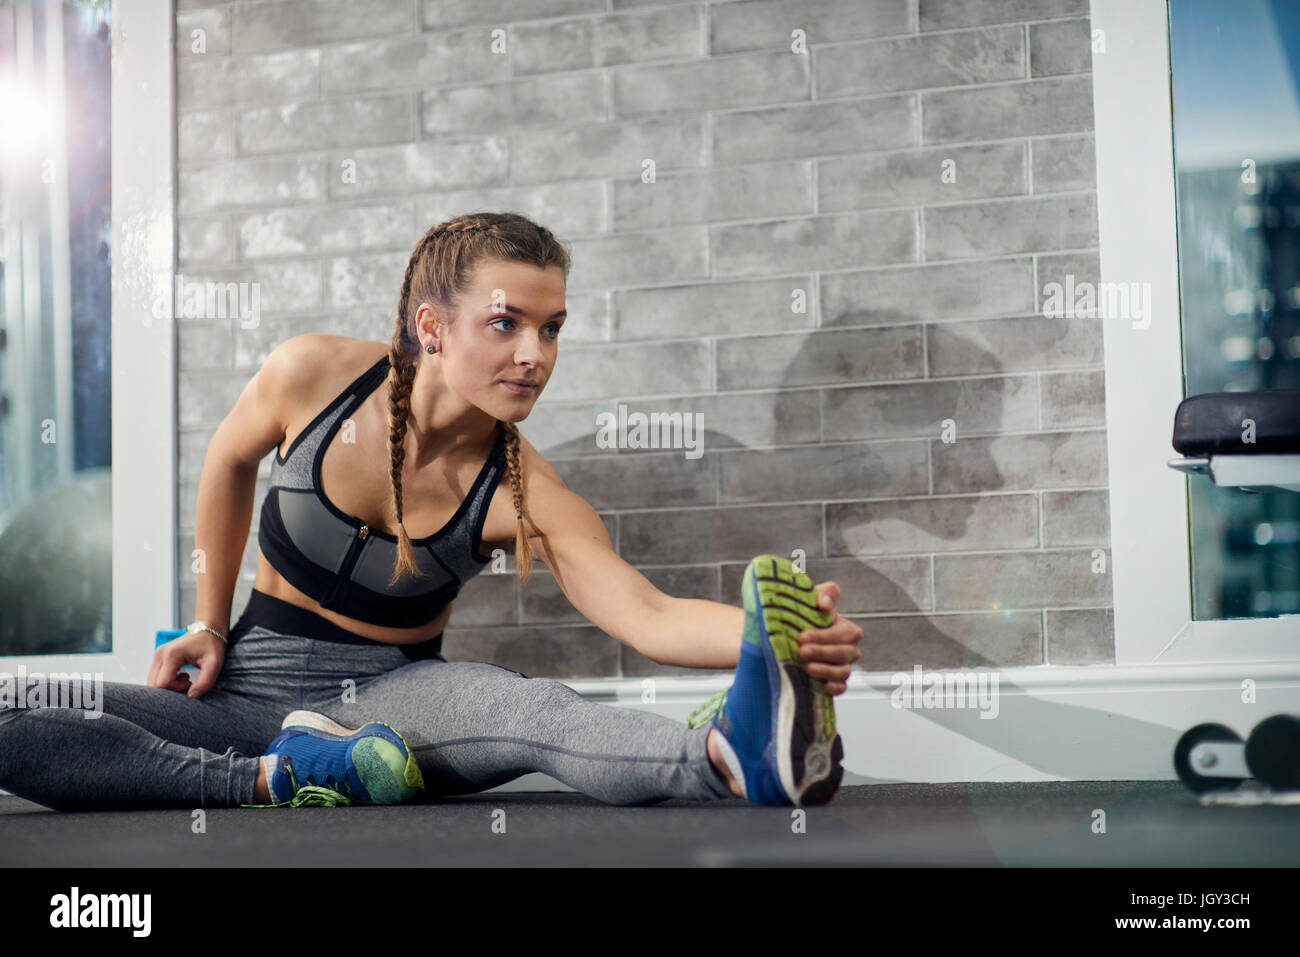 Young woman training, touching toes in gym Stock Photo